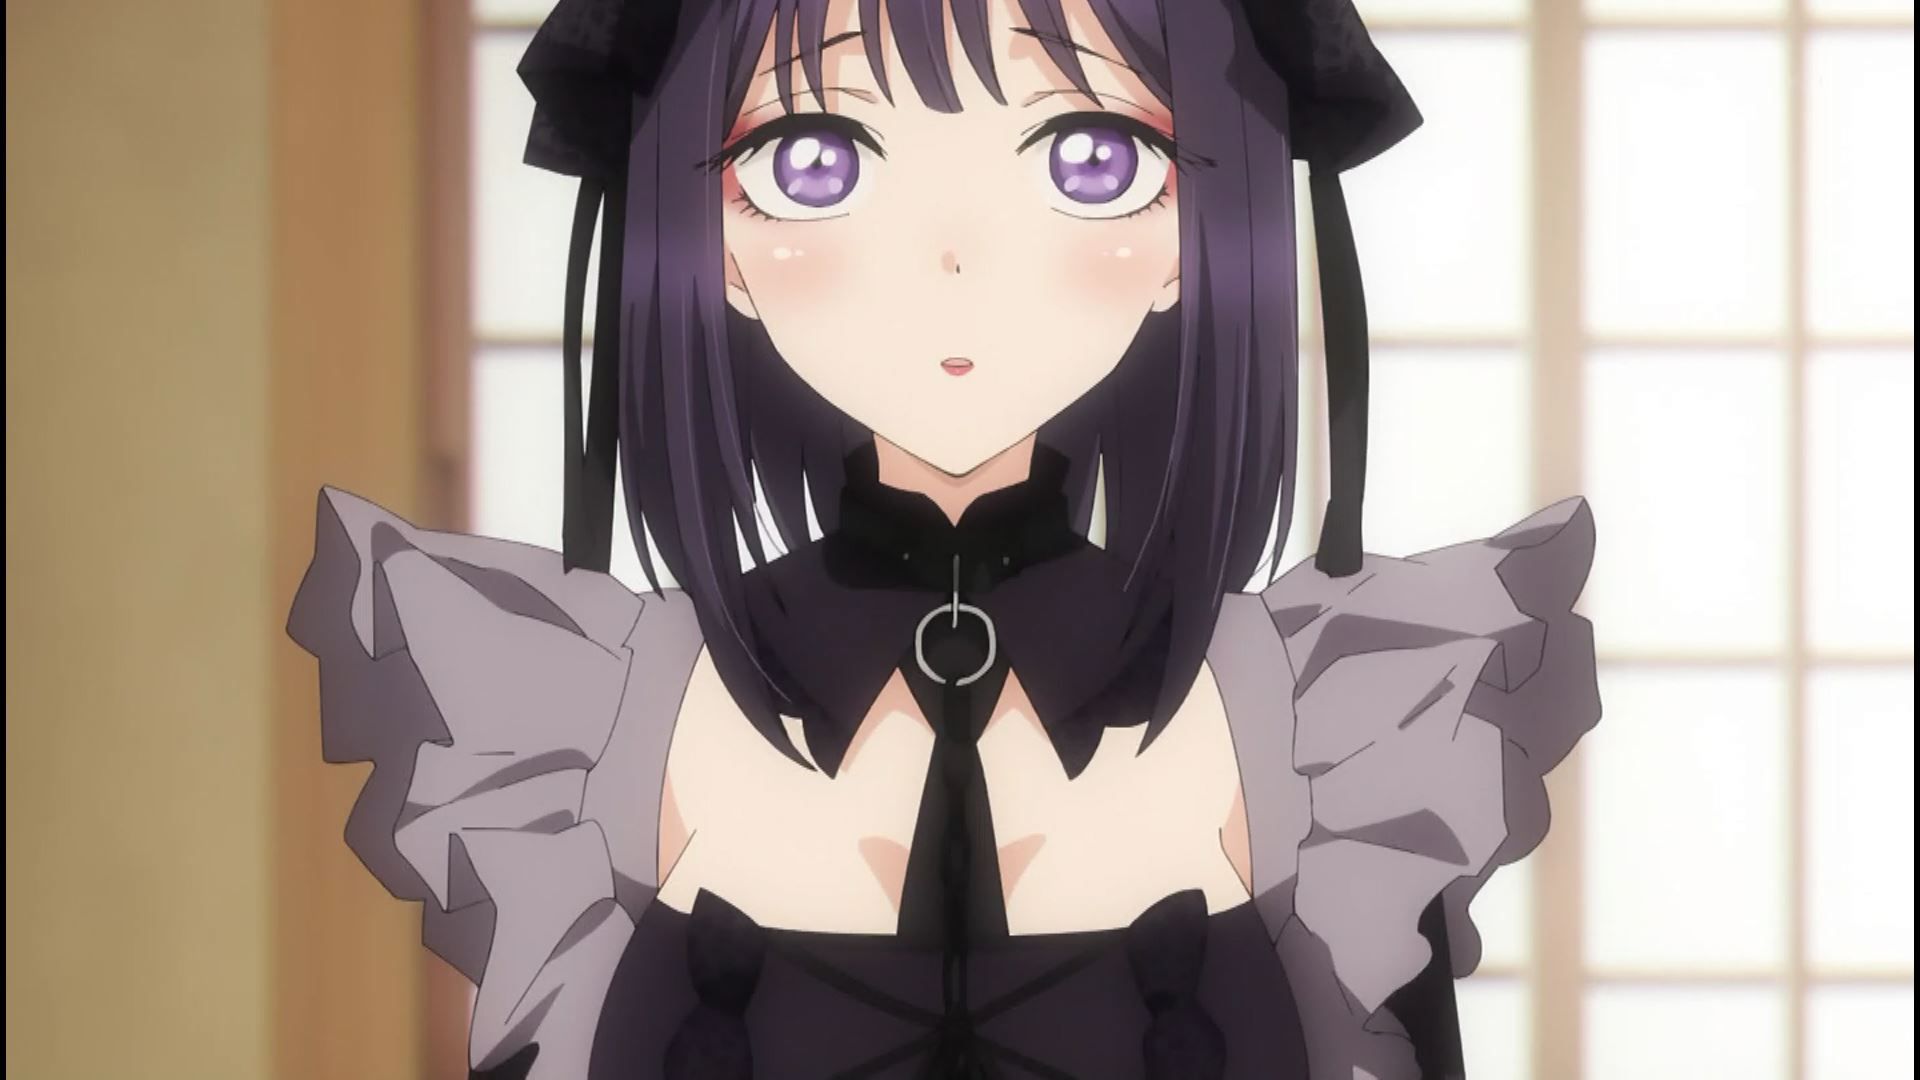 In the changing scene of episode 4 of the anime "That Dress-up Doll Falls in Love", pants and bra are fully visible! 12